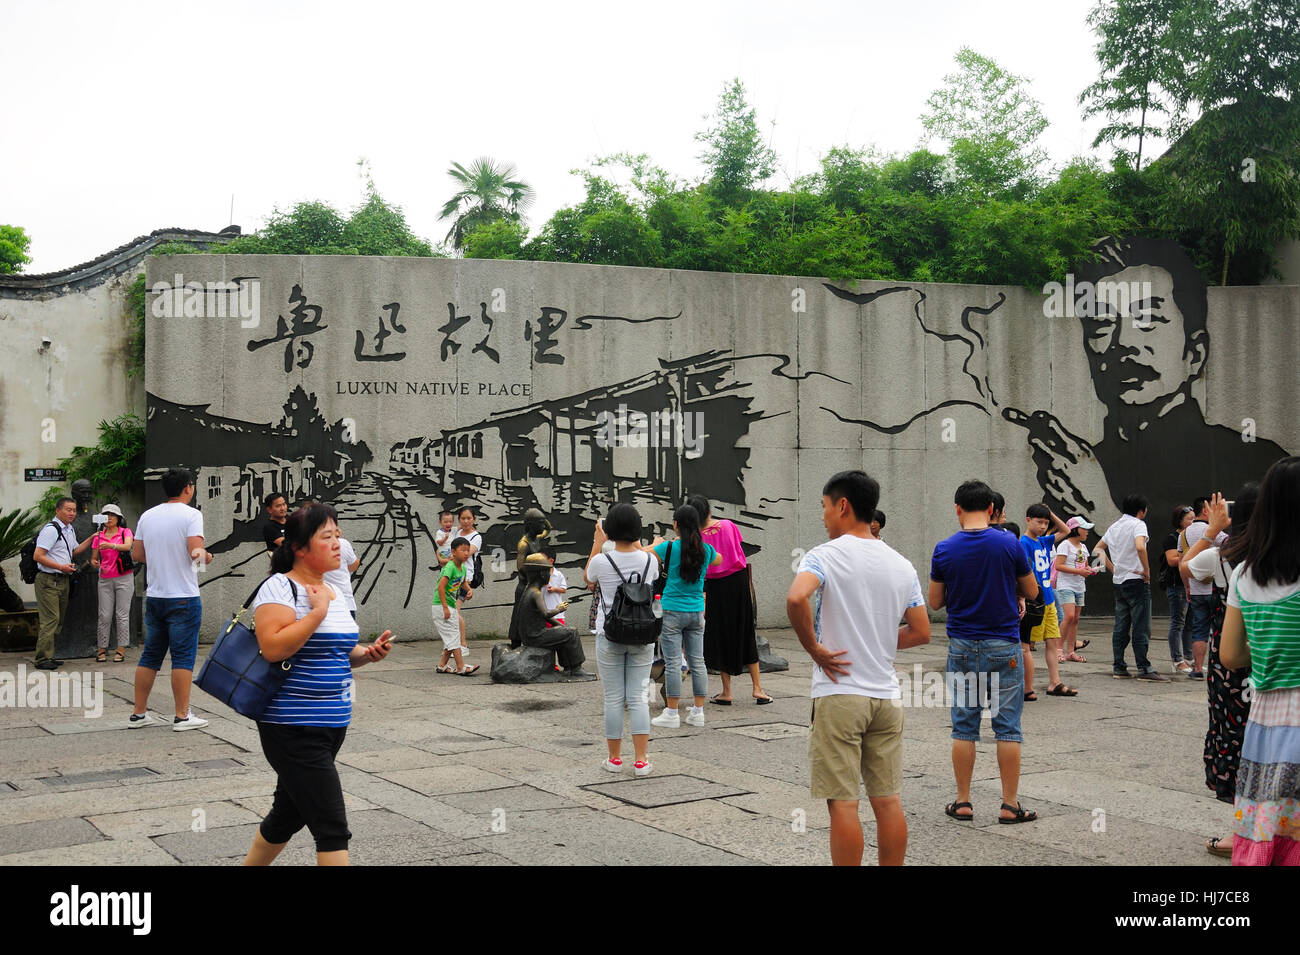 Chinese tourists taking pictures within the famous Chinese writer Lu Xun scenic historic area in the city of Shaoxing China in zhejiang province. Stock Photo